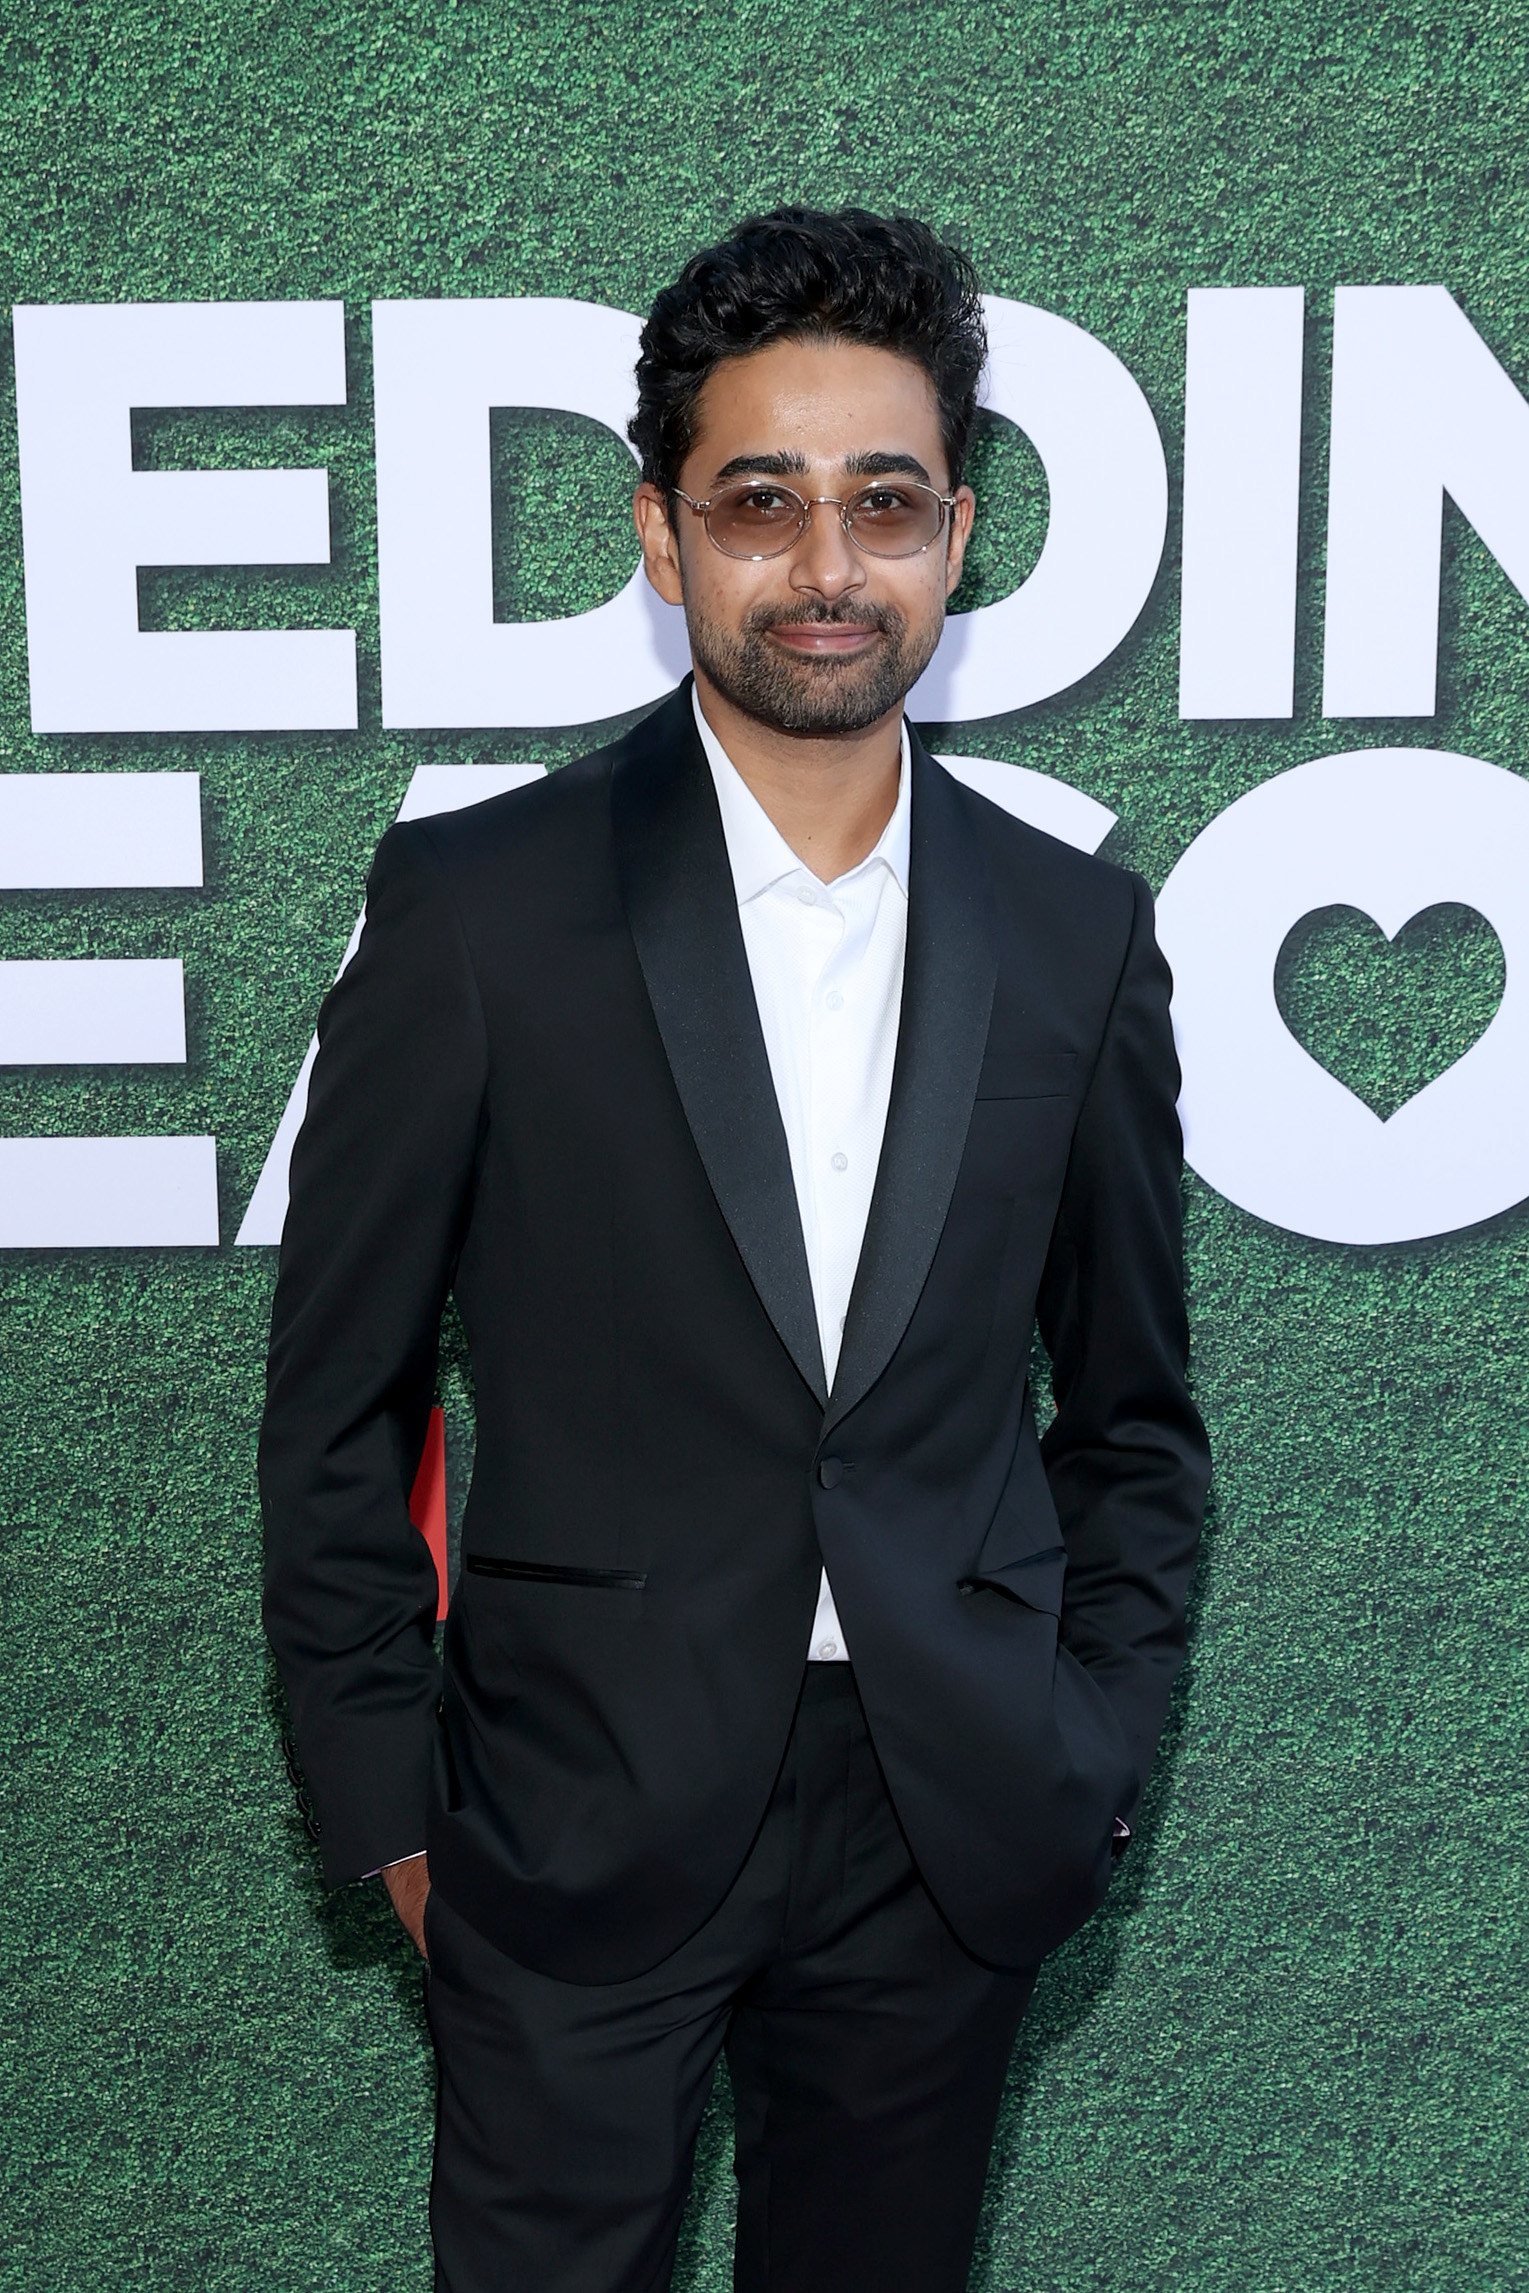 Suraj smiling in a suit wearing shades at an event